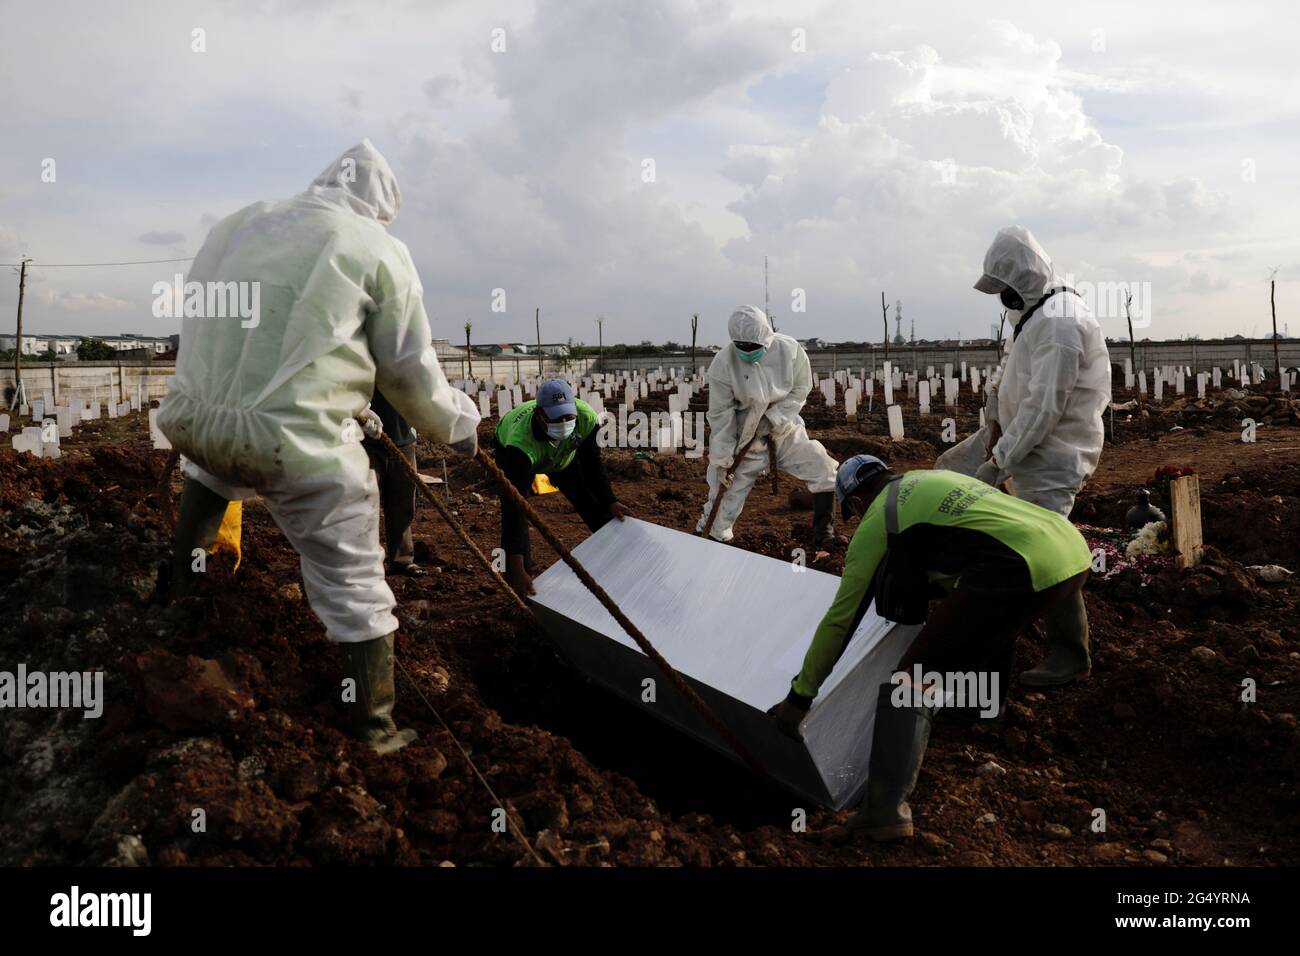 Municipality workers wearing personal protective equipment (PPE) burry a coffin of a coronavirus disease (COVID-19) victime at the burial area provided by the government for victims of the coronavirus disease (COVID-19) in Jakarta, Indonesia, June 24, 2021.REUTERS/Willy Kurniawan Stock Photo